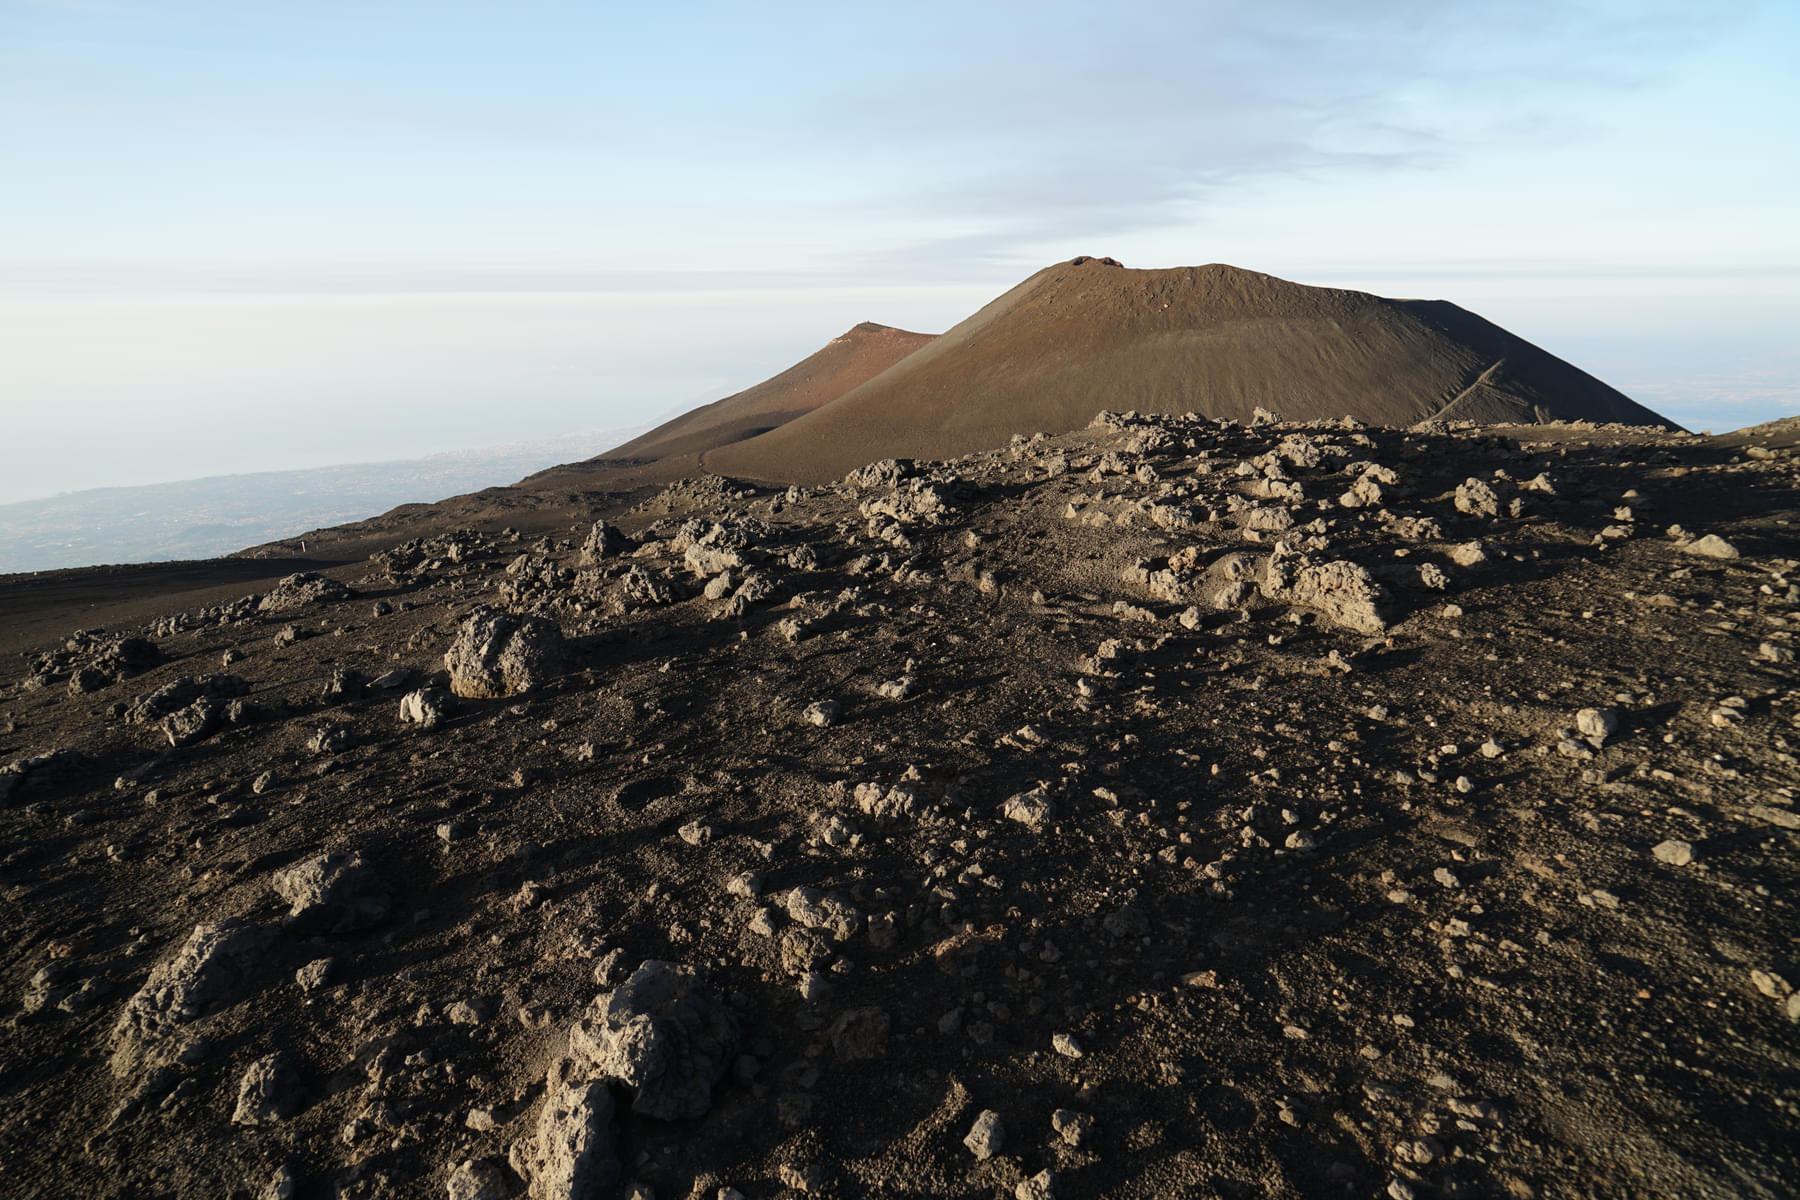 The Summit Craters